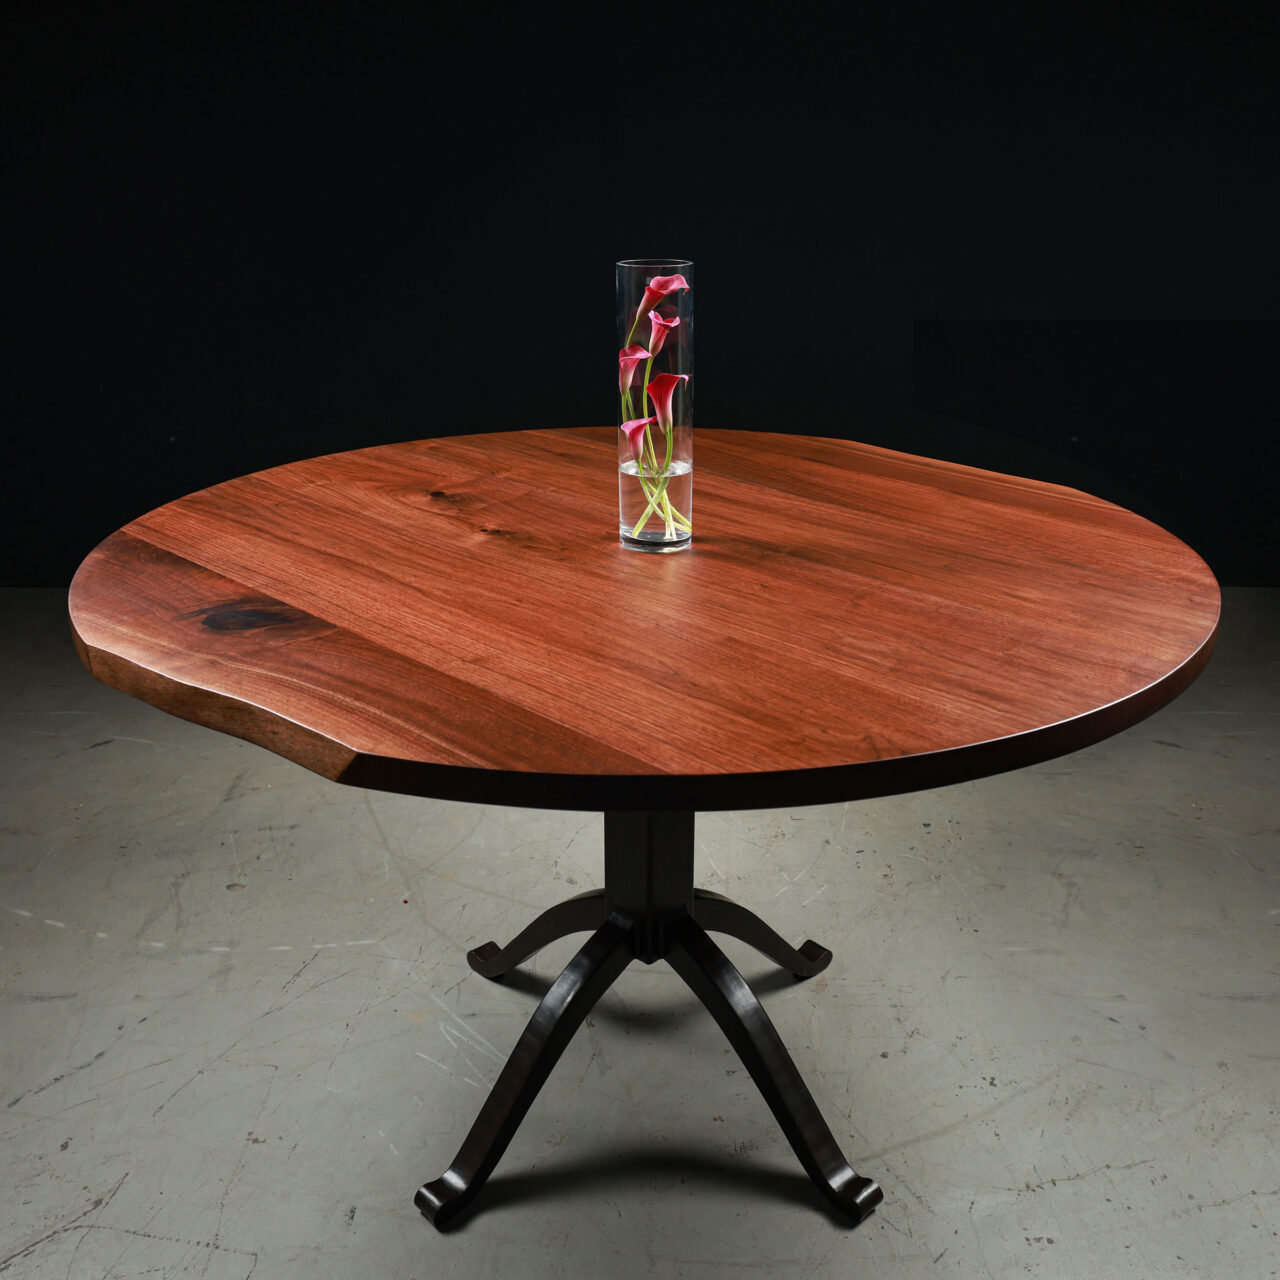 Flow, a pedestal round dining table by SENTIENT Furniture with a beautiful reddish wood top and a black metal base. The table is adorned with a tall glass vase containing red and green flowers, set against a black backdrop for a dramatic effect.